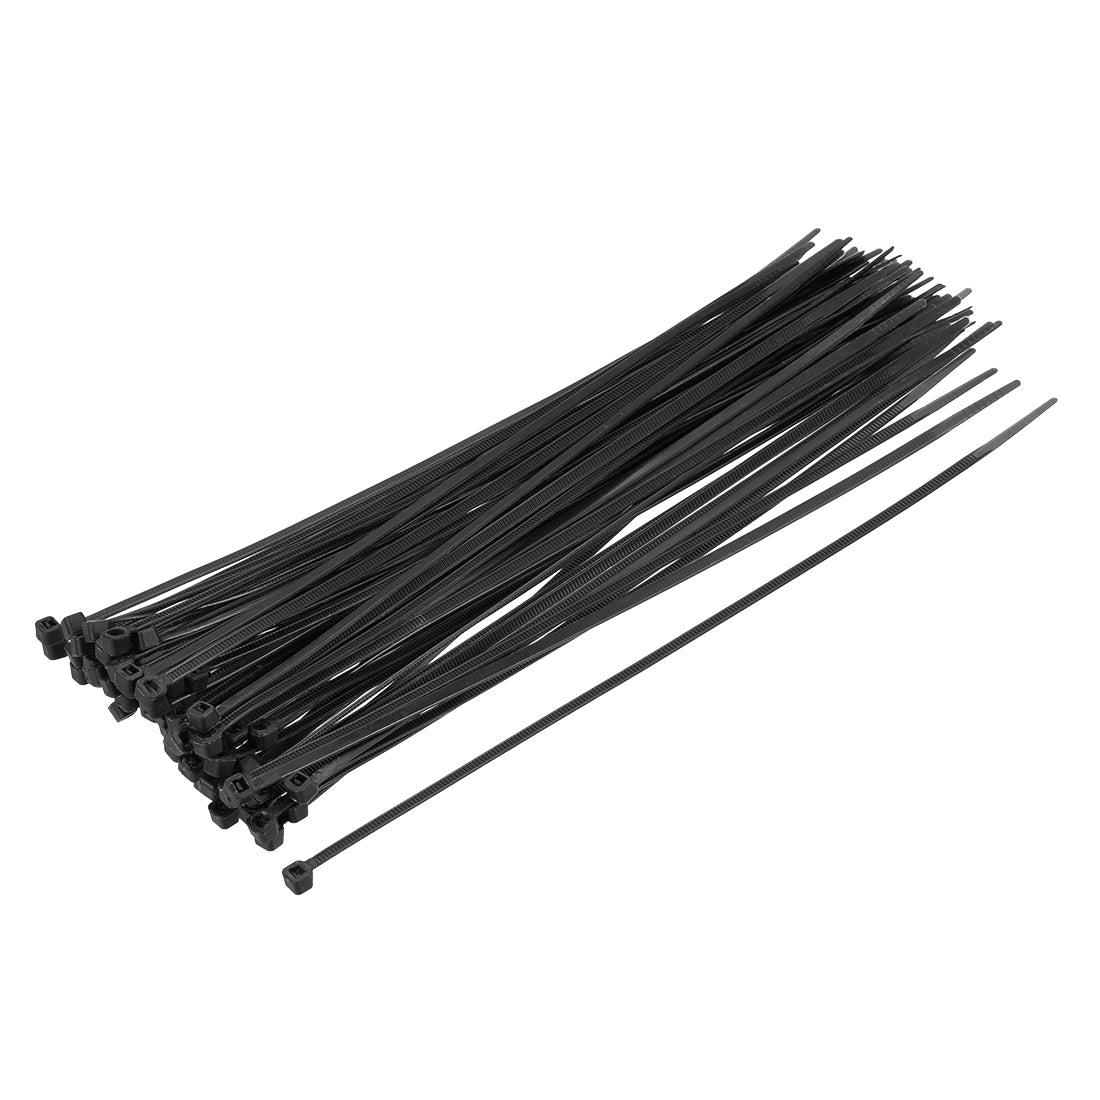 uxcell Uxcell Cable Zip Ties 250mmx4mm Self-Locking Nylon Tie Wraps Black 40pcs